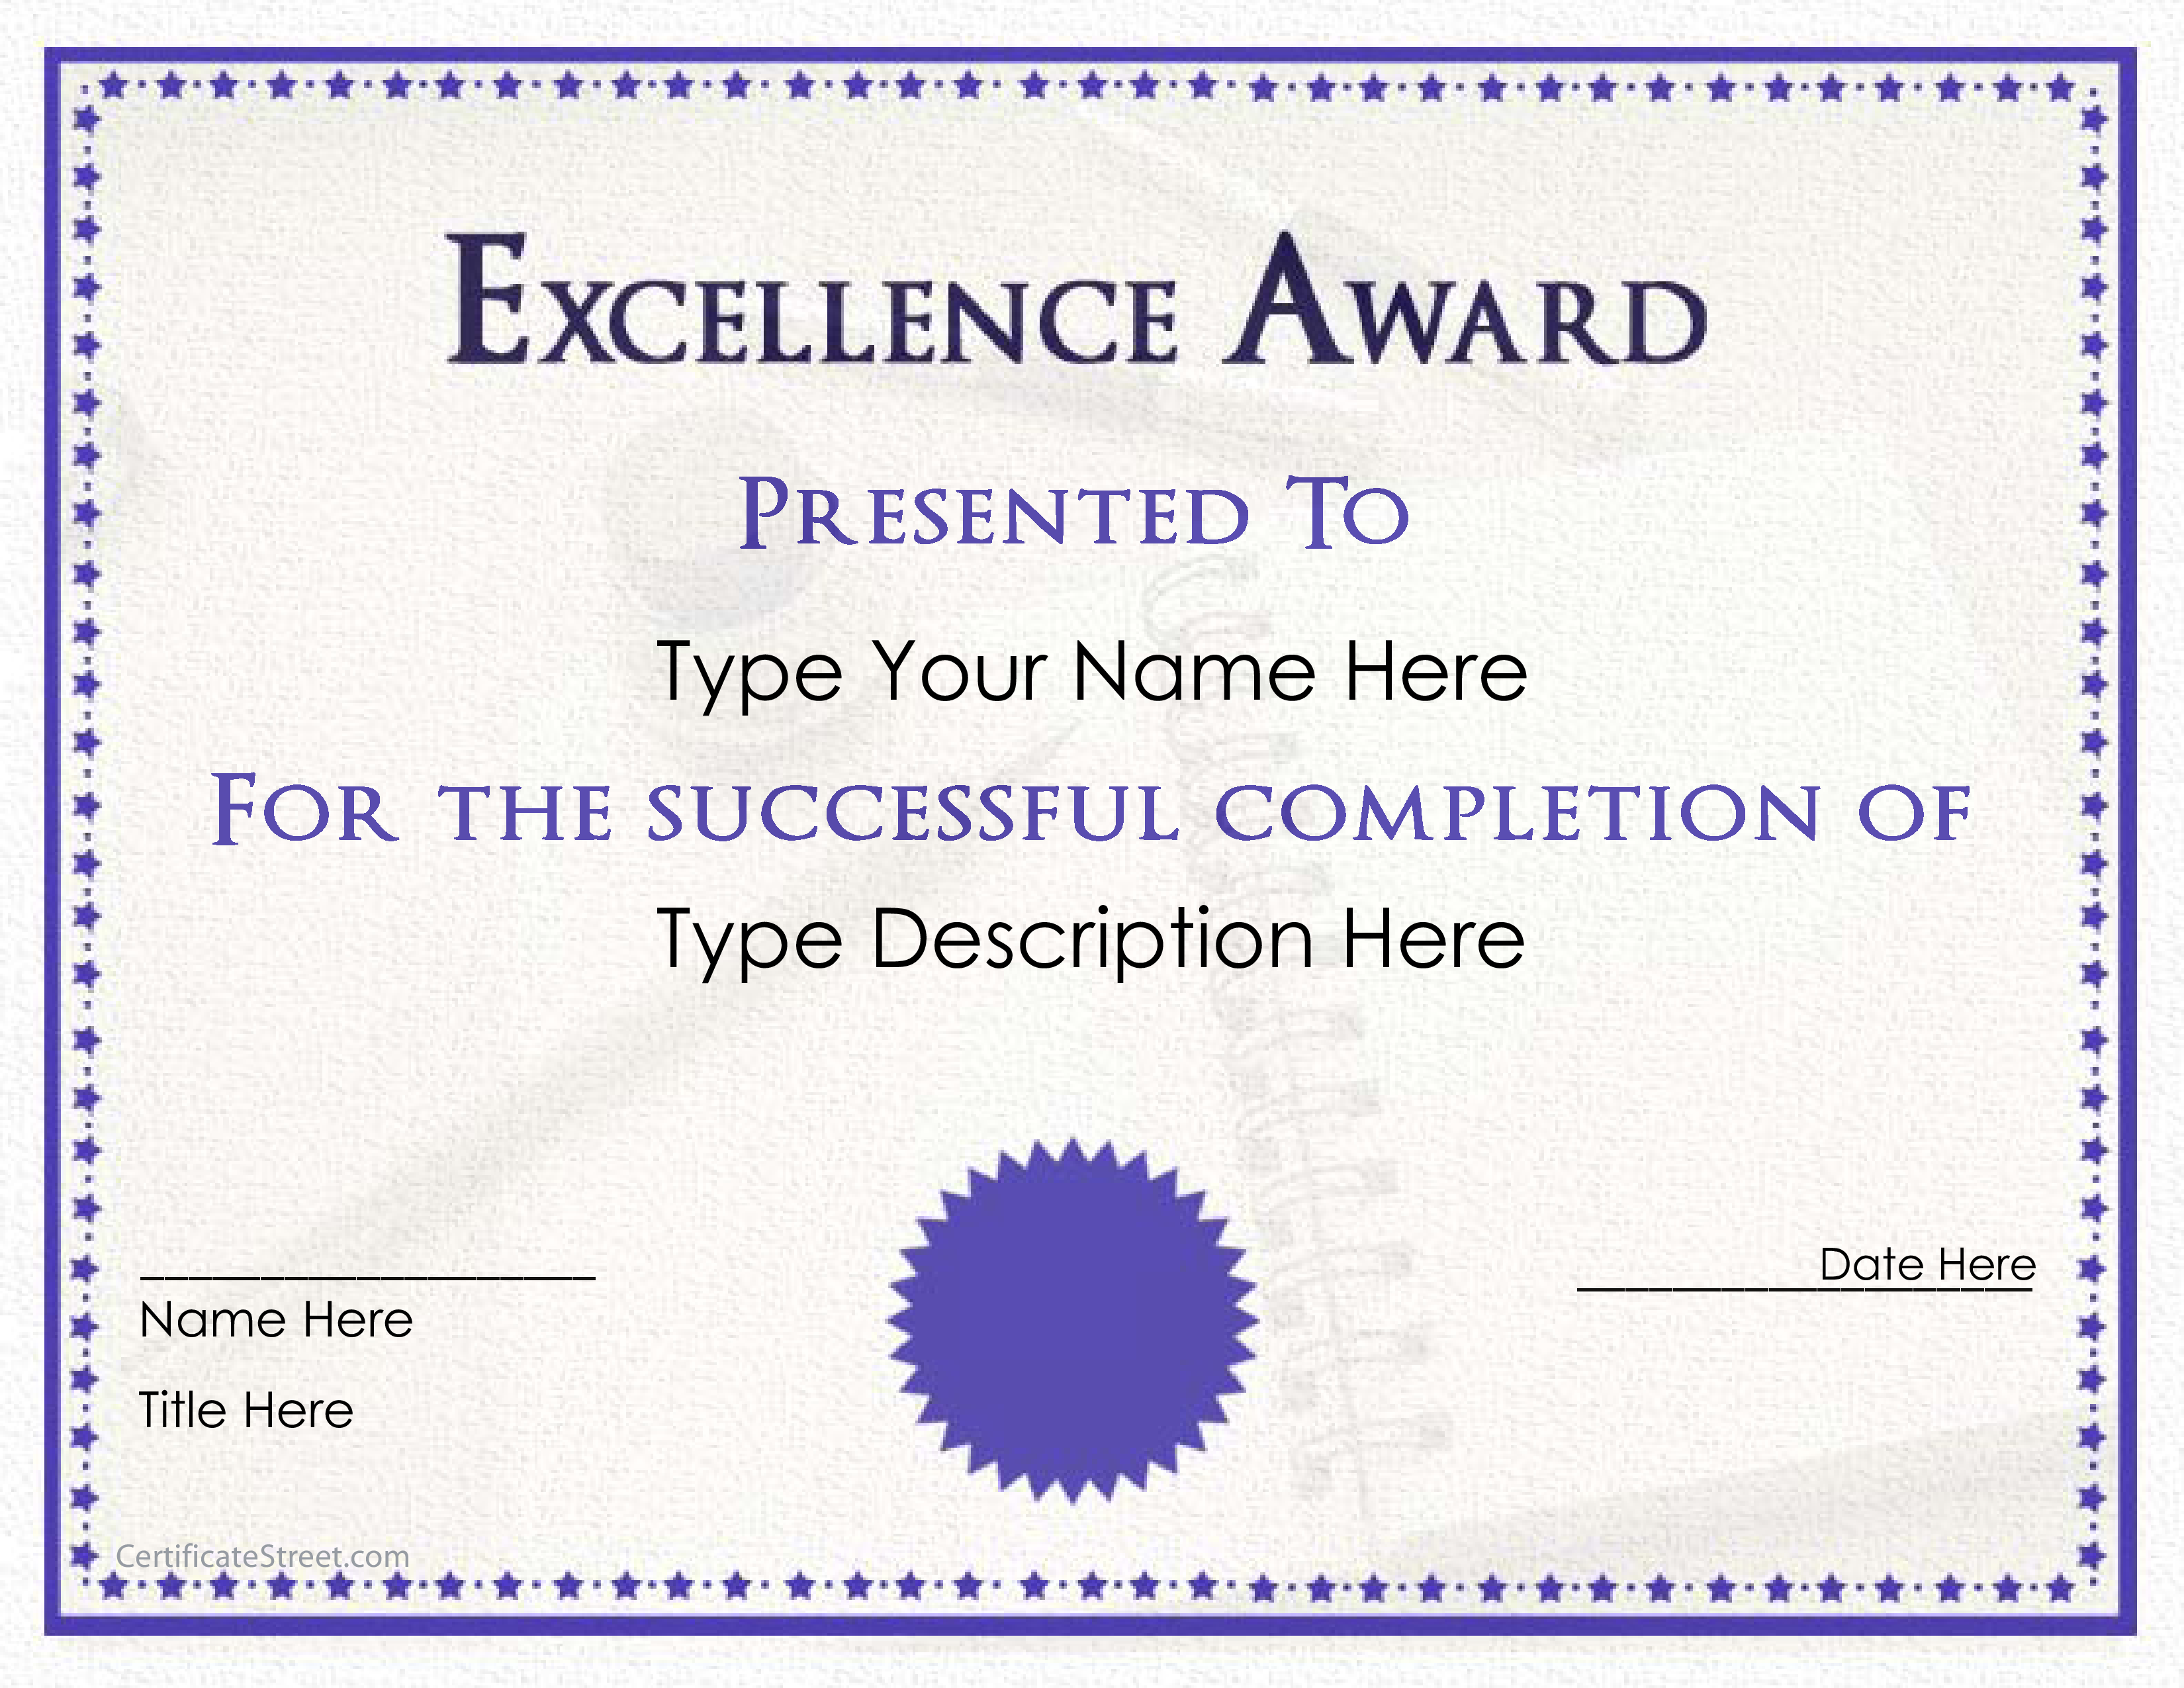 Excellence Award Certificate 模板